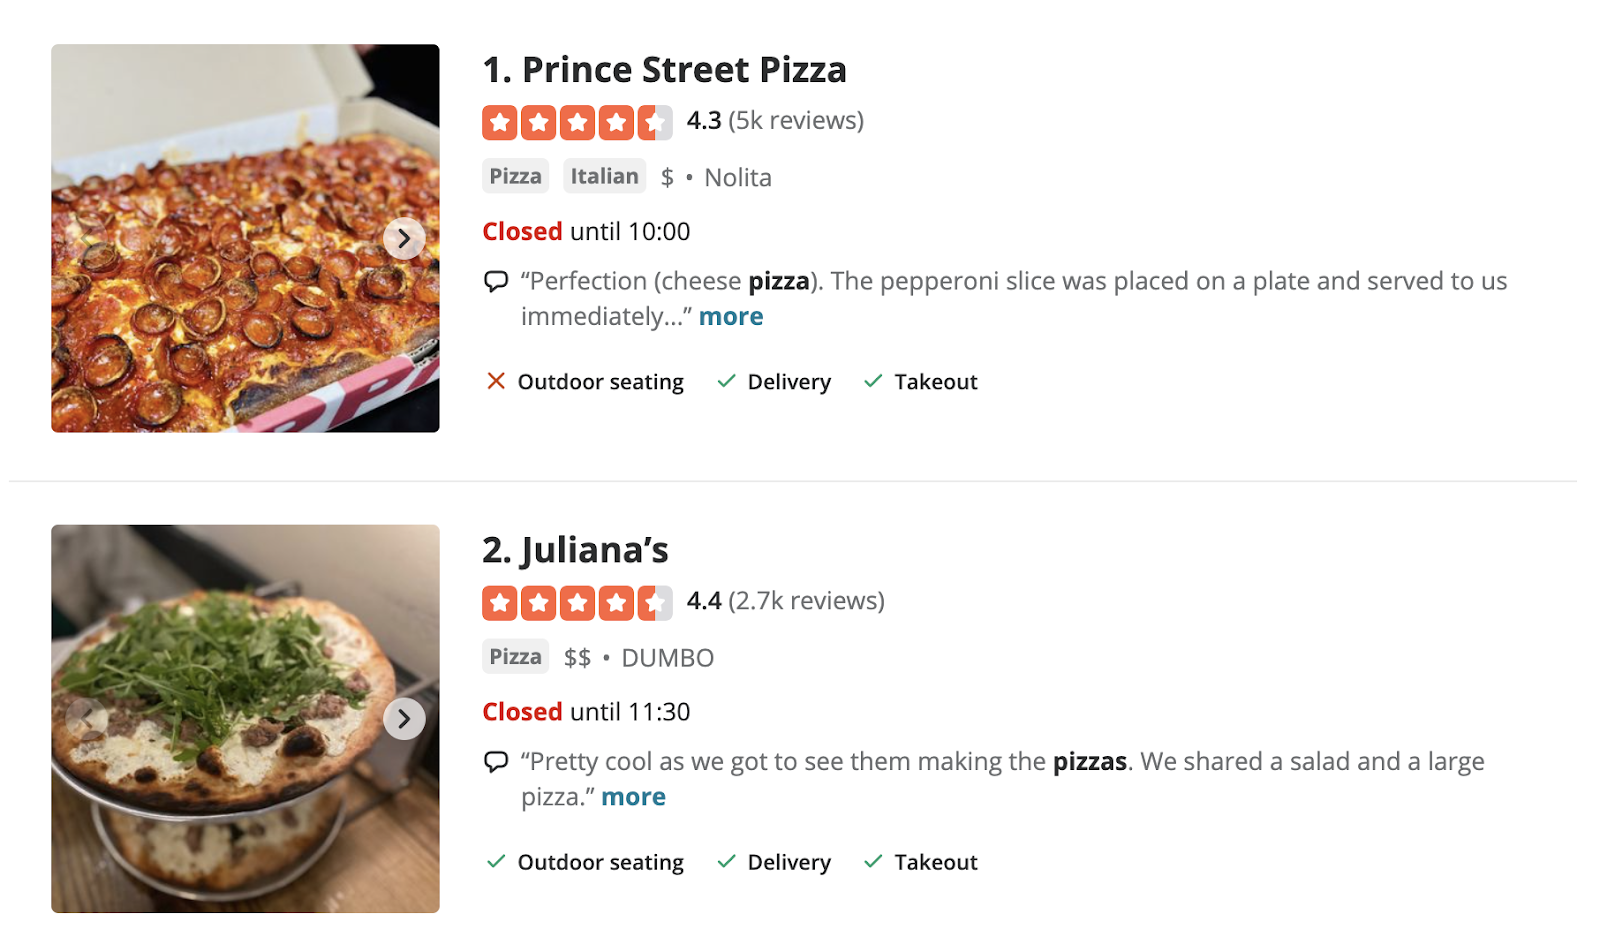 Prince Street Pizza and Juliana’s results on Yelp